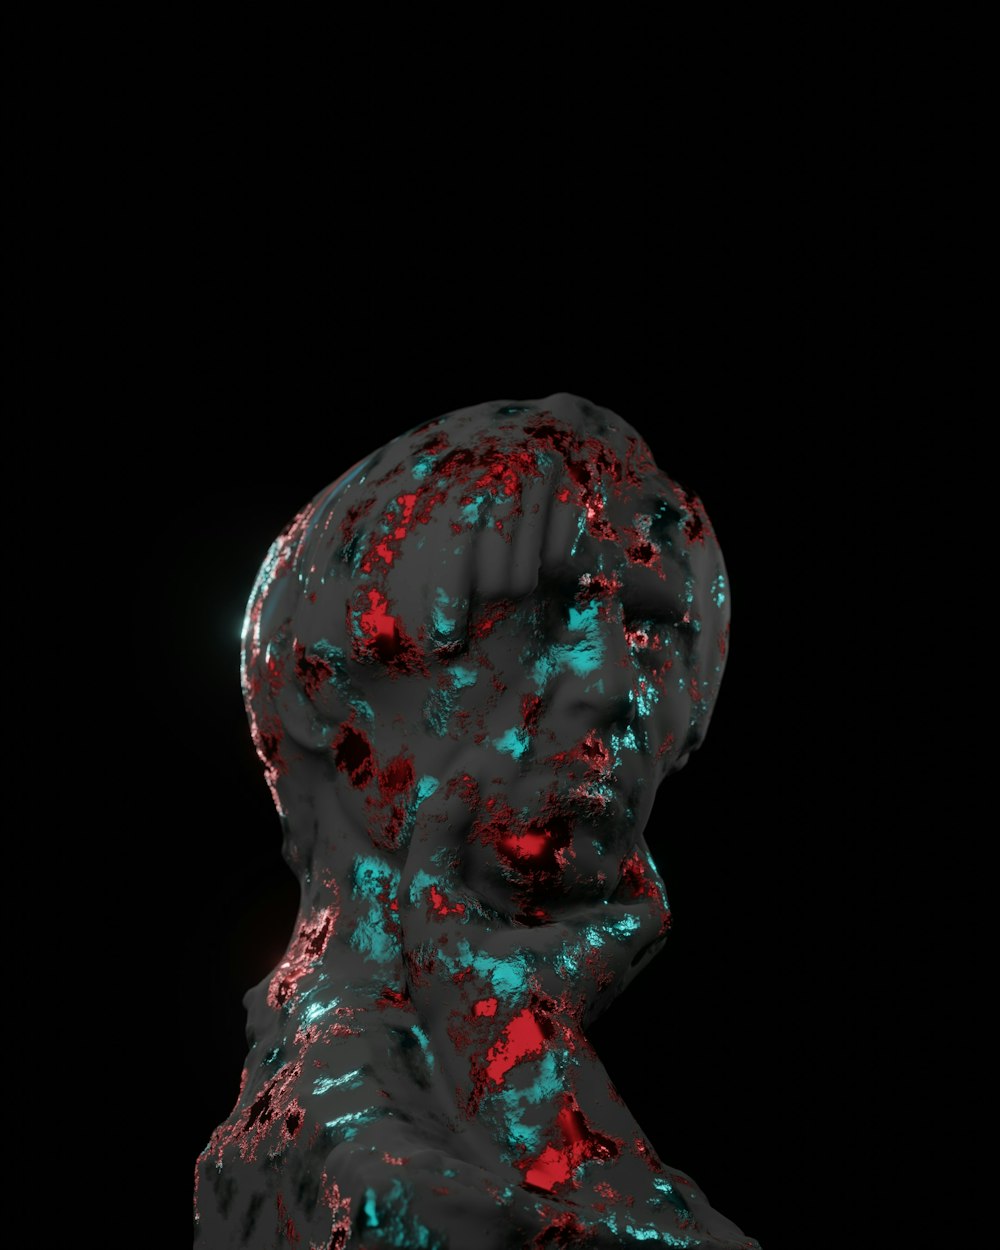 a close up of a human head with a black background